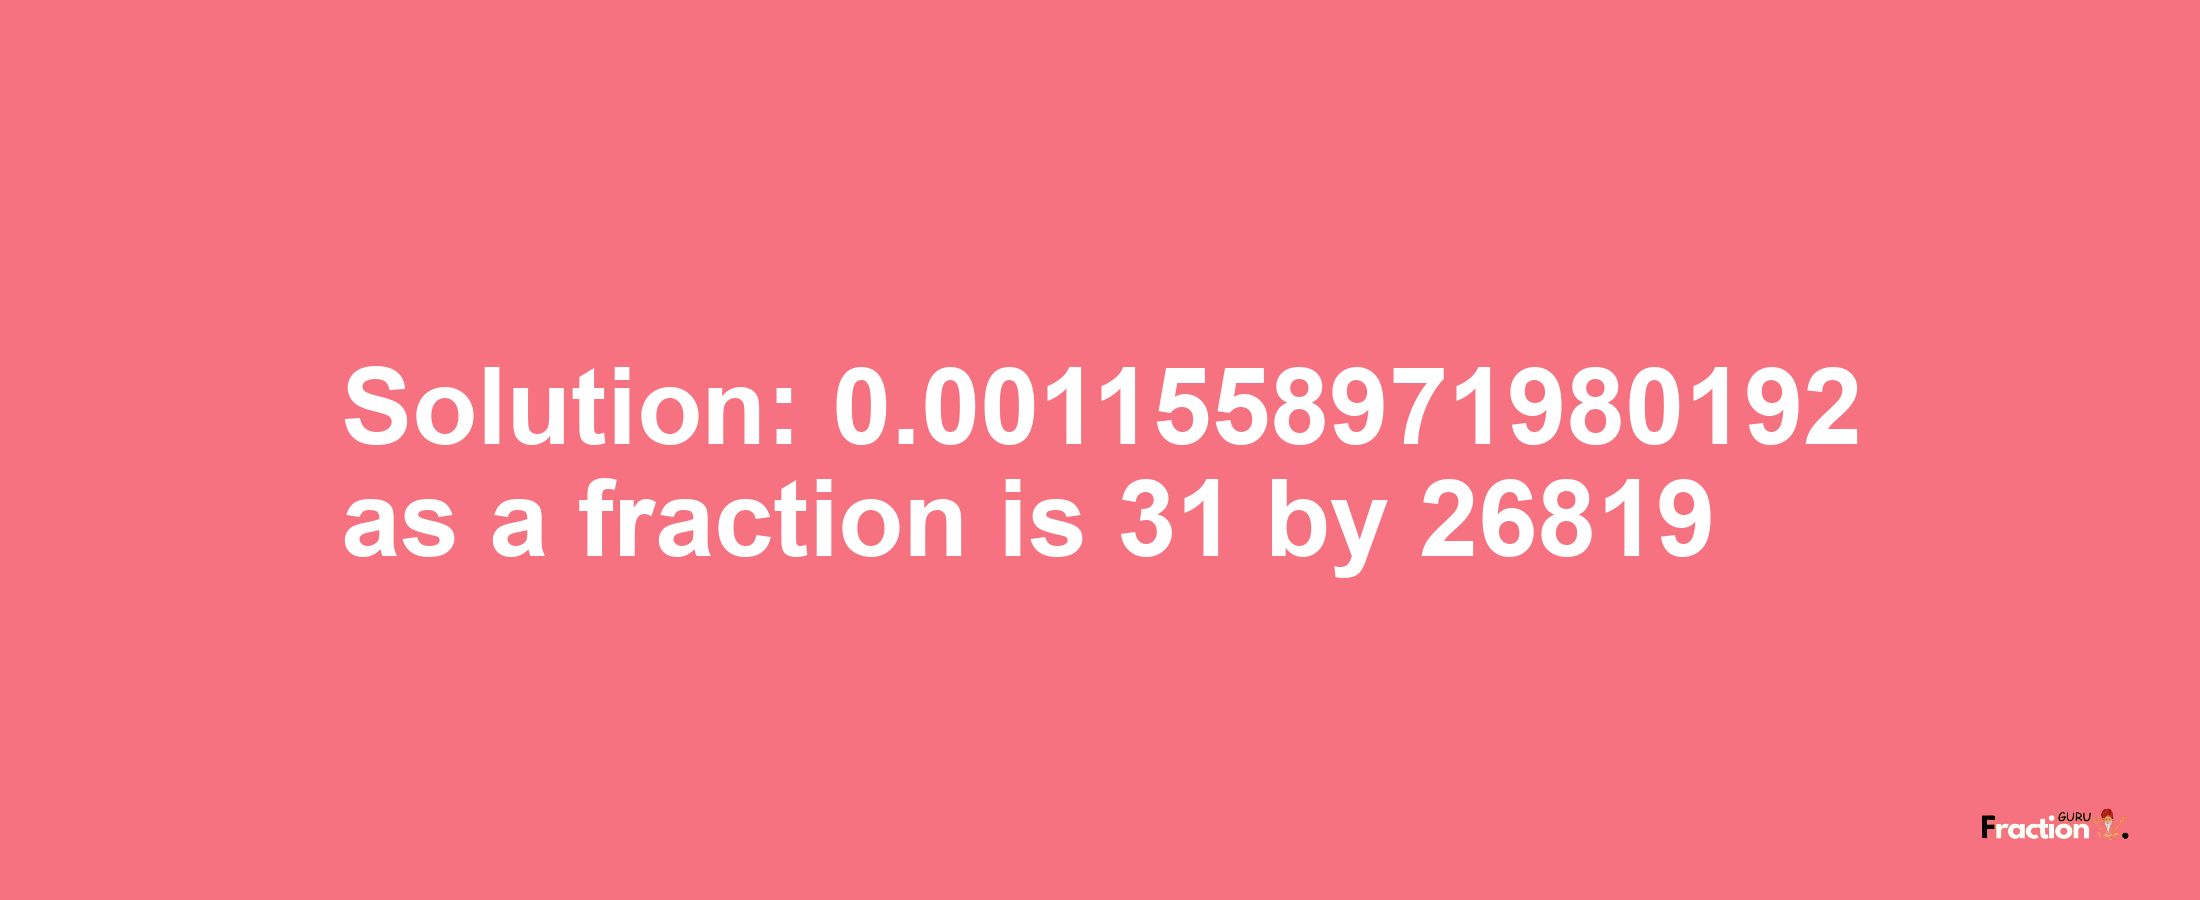 Solution:0.0011558971980192 as a fraction is 31/26819